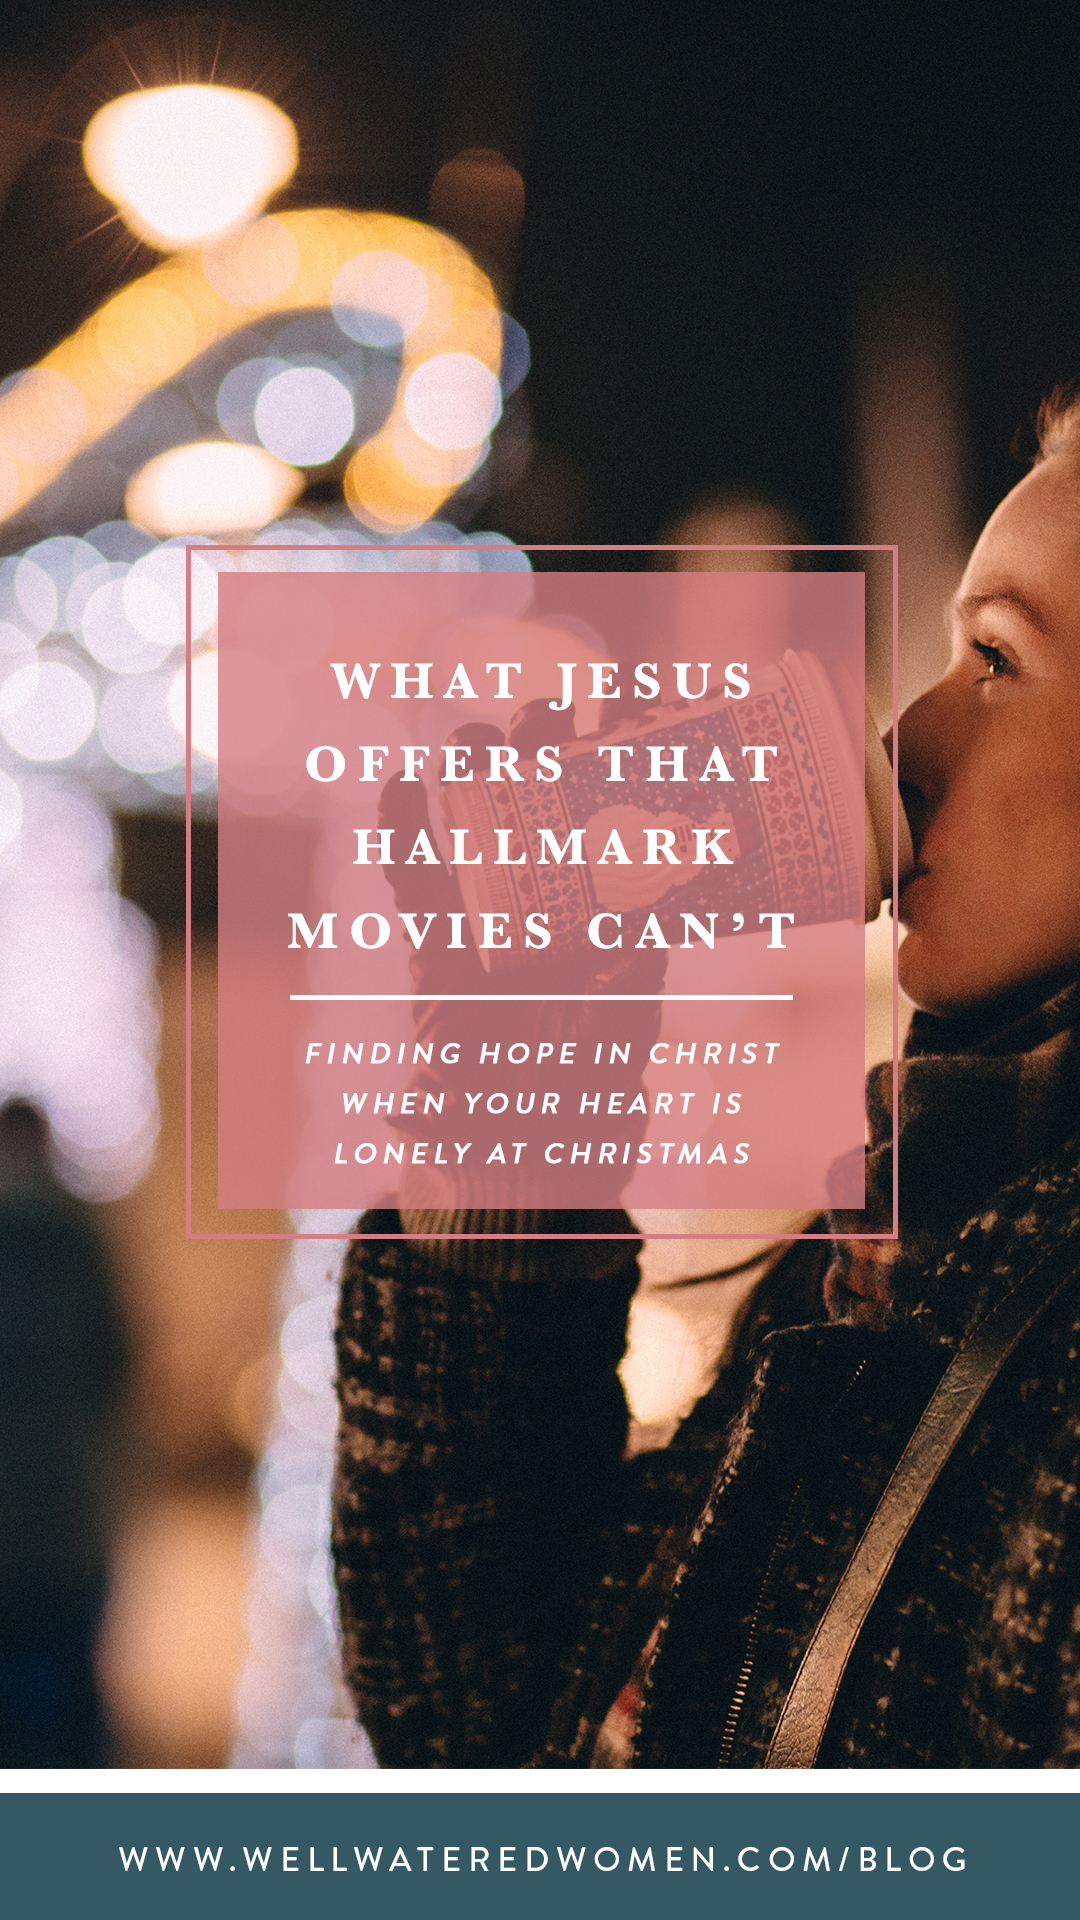 What Jesus Offers That Hallmark Movies Can't: Finding your hope in Christ when your heart is lonely at Christmas